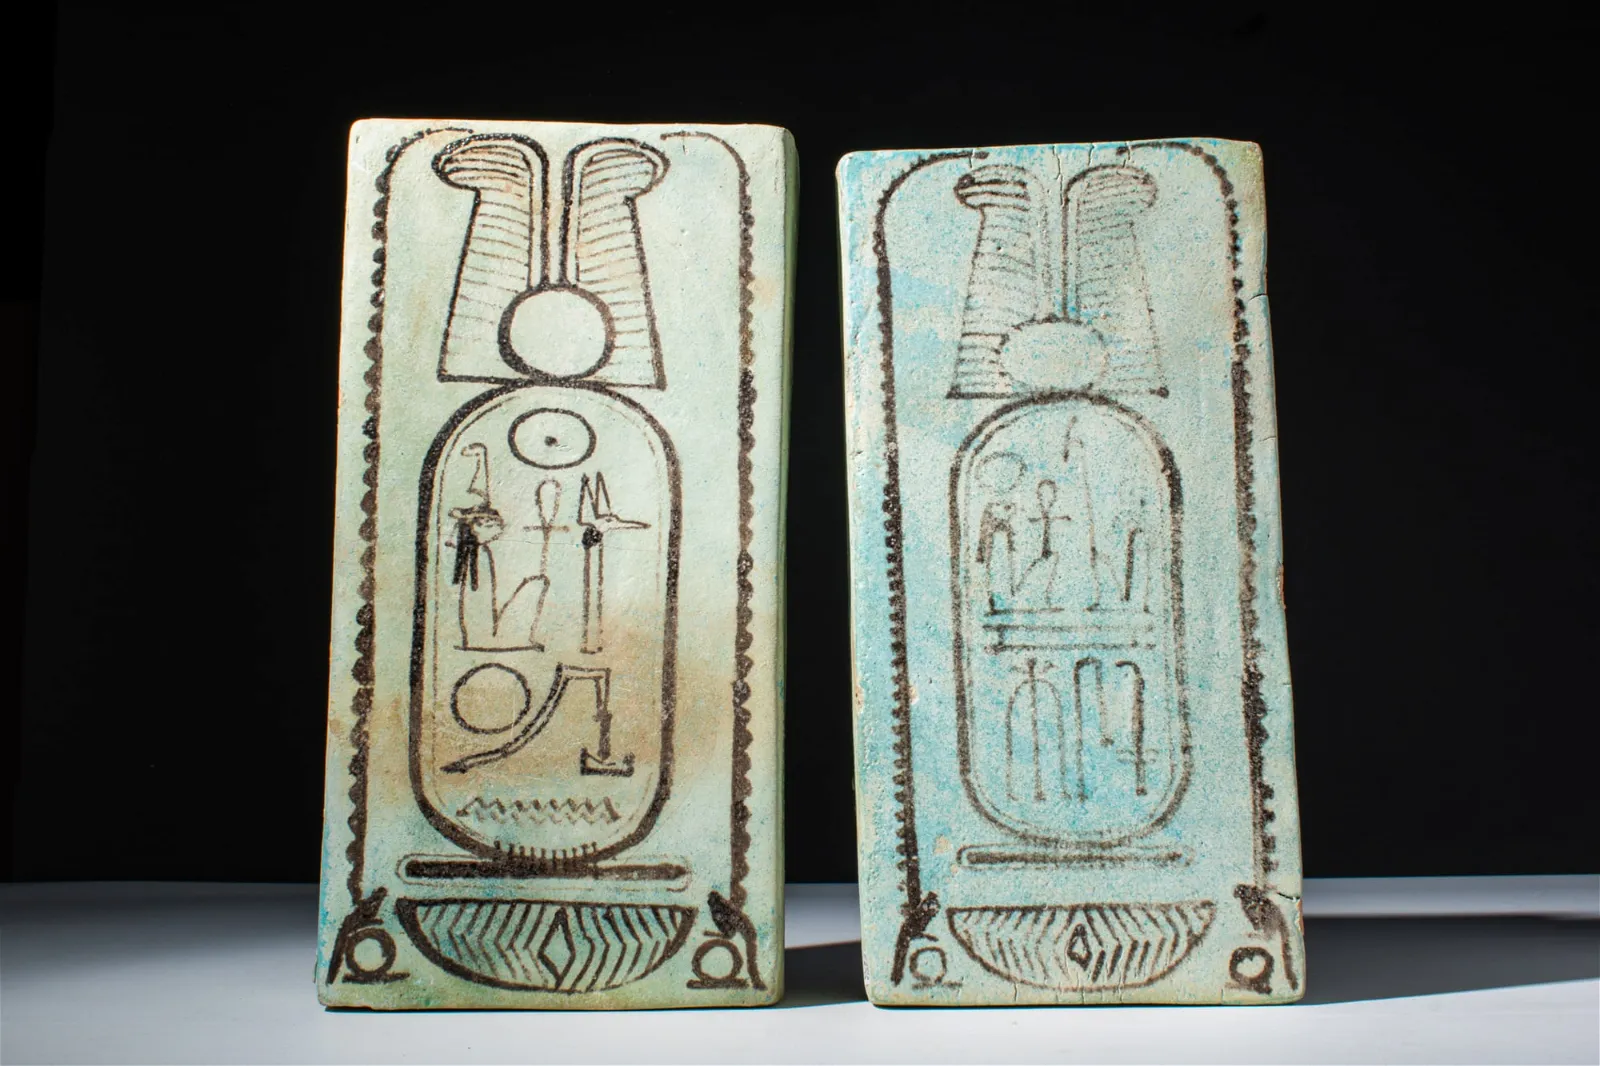 Two large Egyptian New Kingdom faience foundation tiles carrying the prenomen and nomen of Ramesses II, which sold for £24,000 (£30,000 or $38,050 with buyer’s premium) at Apollo Art Auctions.